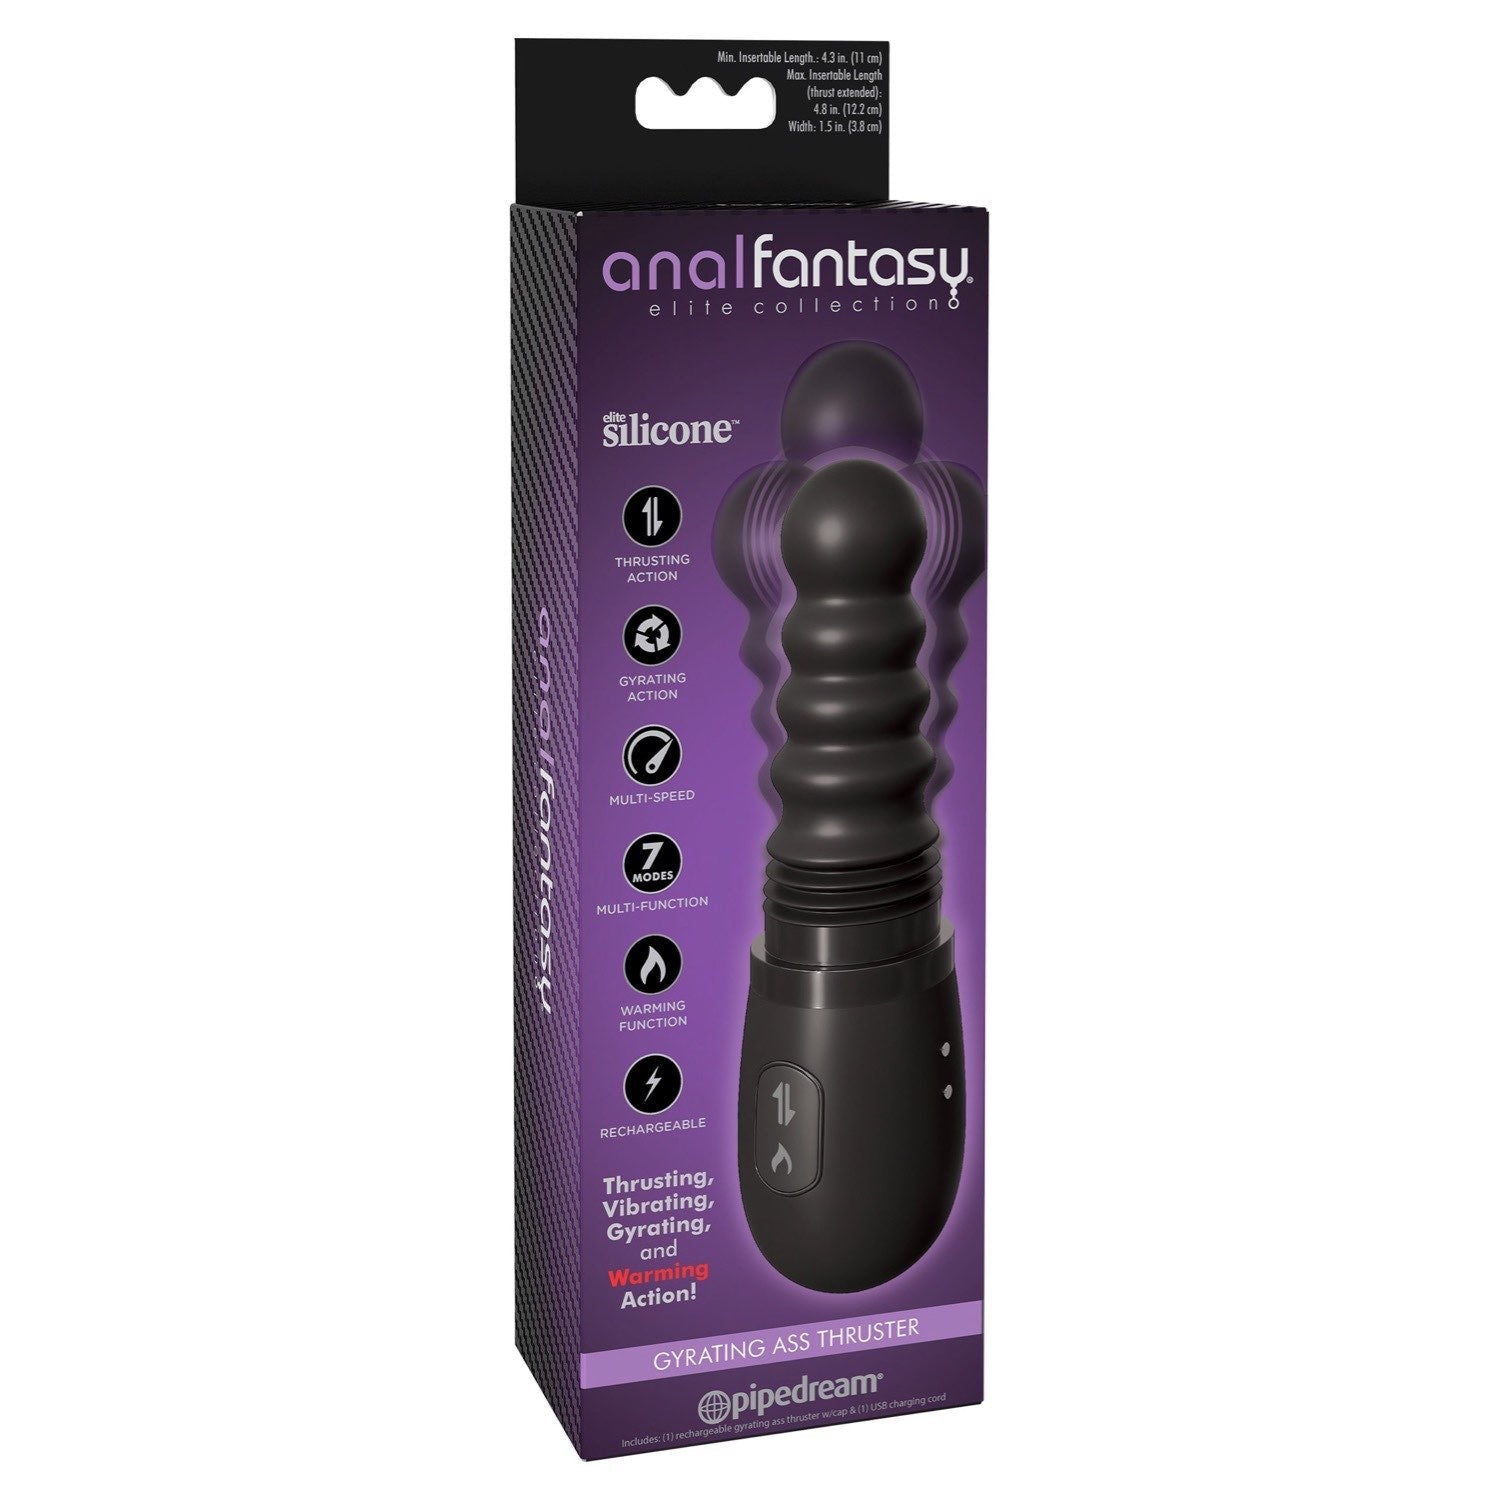 Anal Fantasy Elite Gyrating Ass Thruster - Black 21.3 cm (8.5&quot;) Thrusting Anal Vibrator by Pipedream